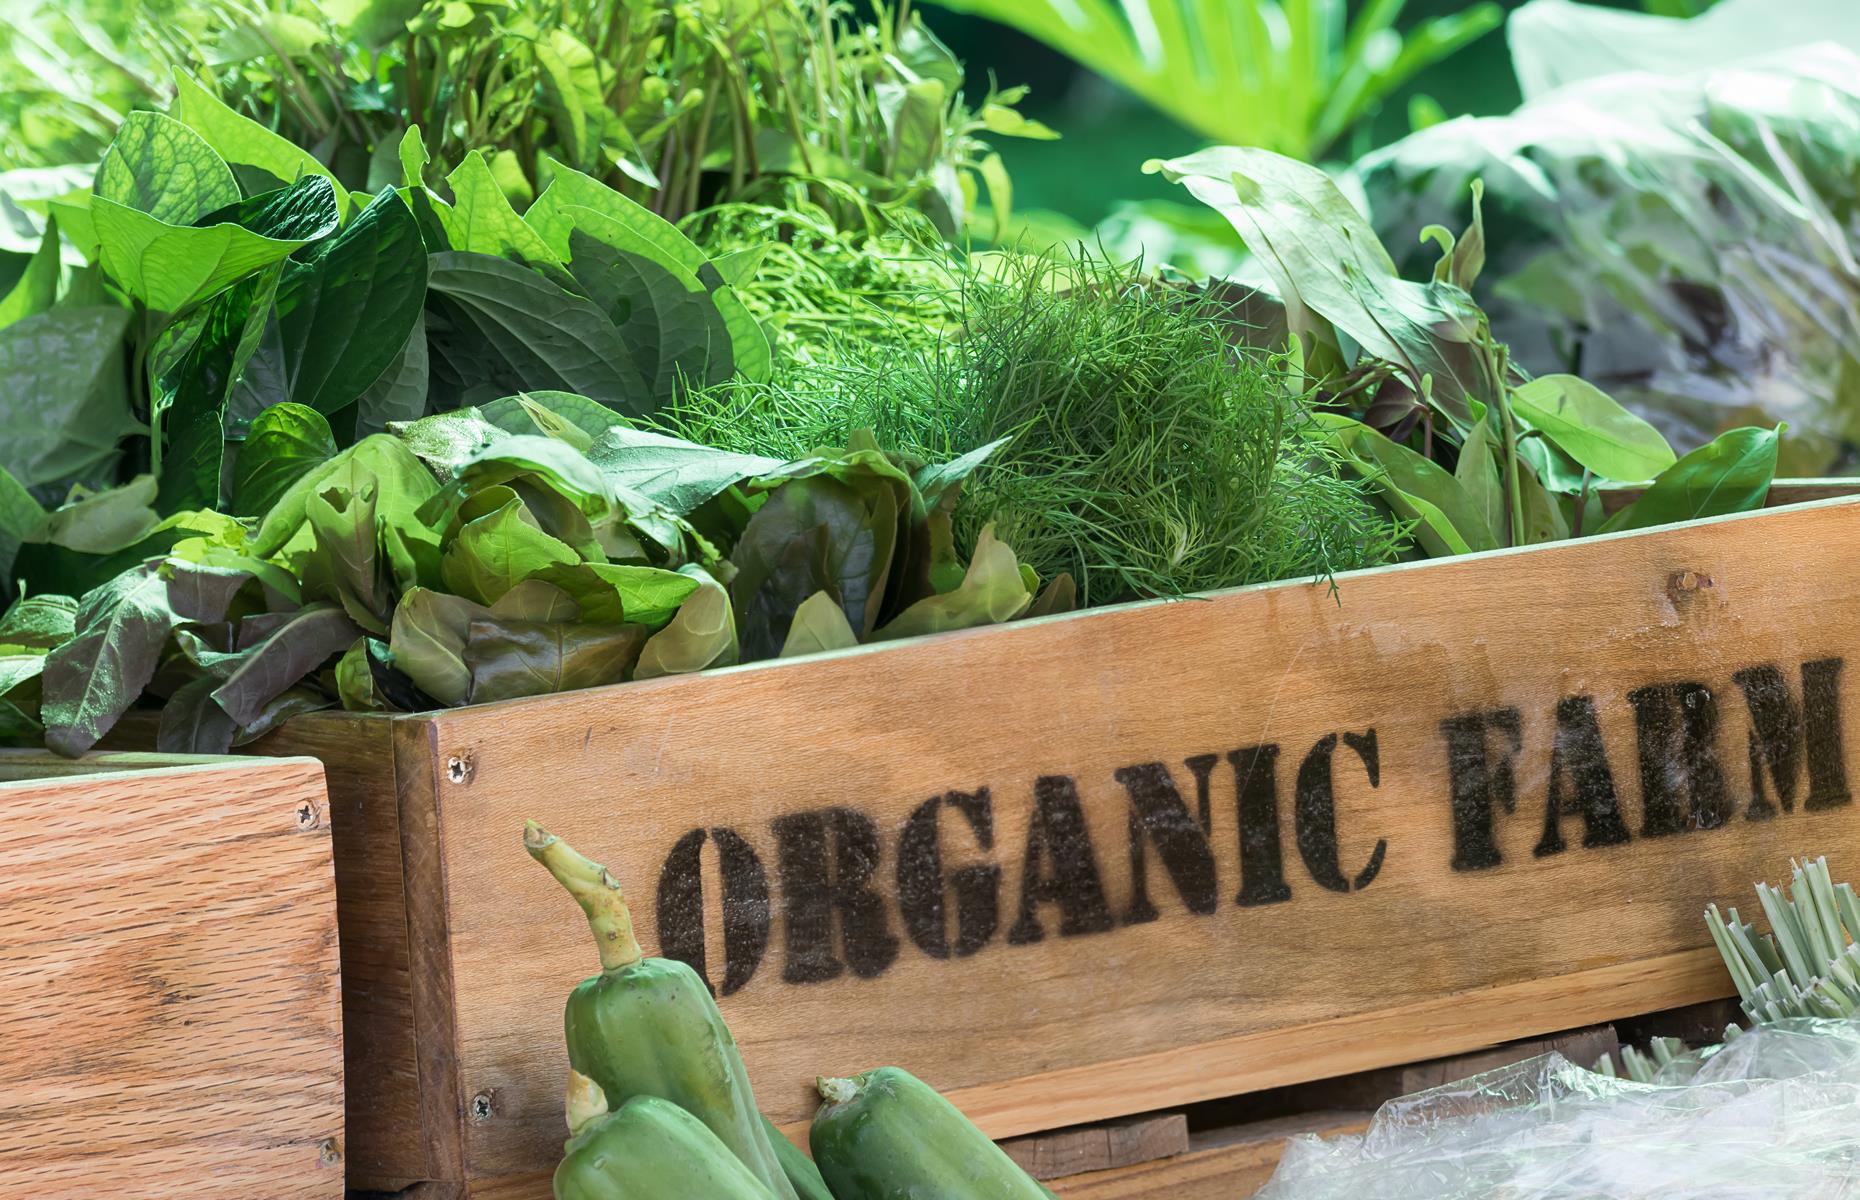 Organic is much better for us